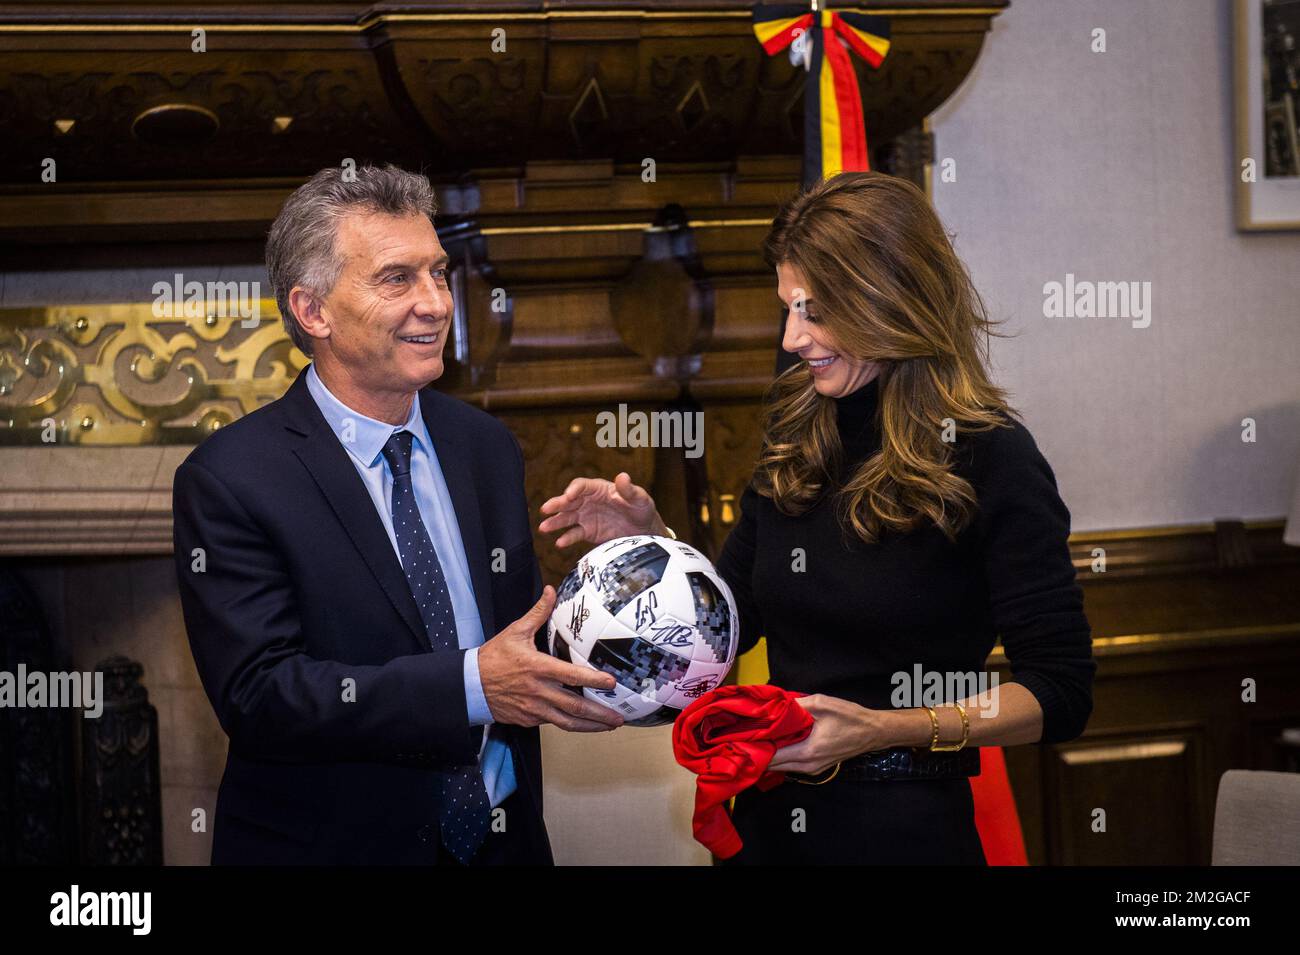 President of Argentina Mauricio Macri and his wife Juliana Awada pictured during a meeting with the President of Argentina on the second day of a Belgian Economic mission to Argentina, Tuesday 26 June 2018 in Buenos Aires, Argentina. Several federal and regional ministers accompany the princess on a week-long economic mission to Argentina and Uruguay. BELGA PHOTO LAURIE DIEFFEMBACQ Stock Photo